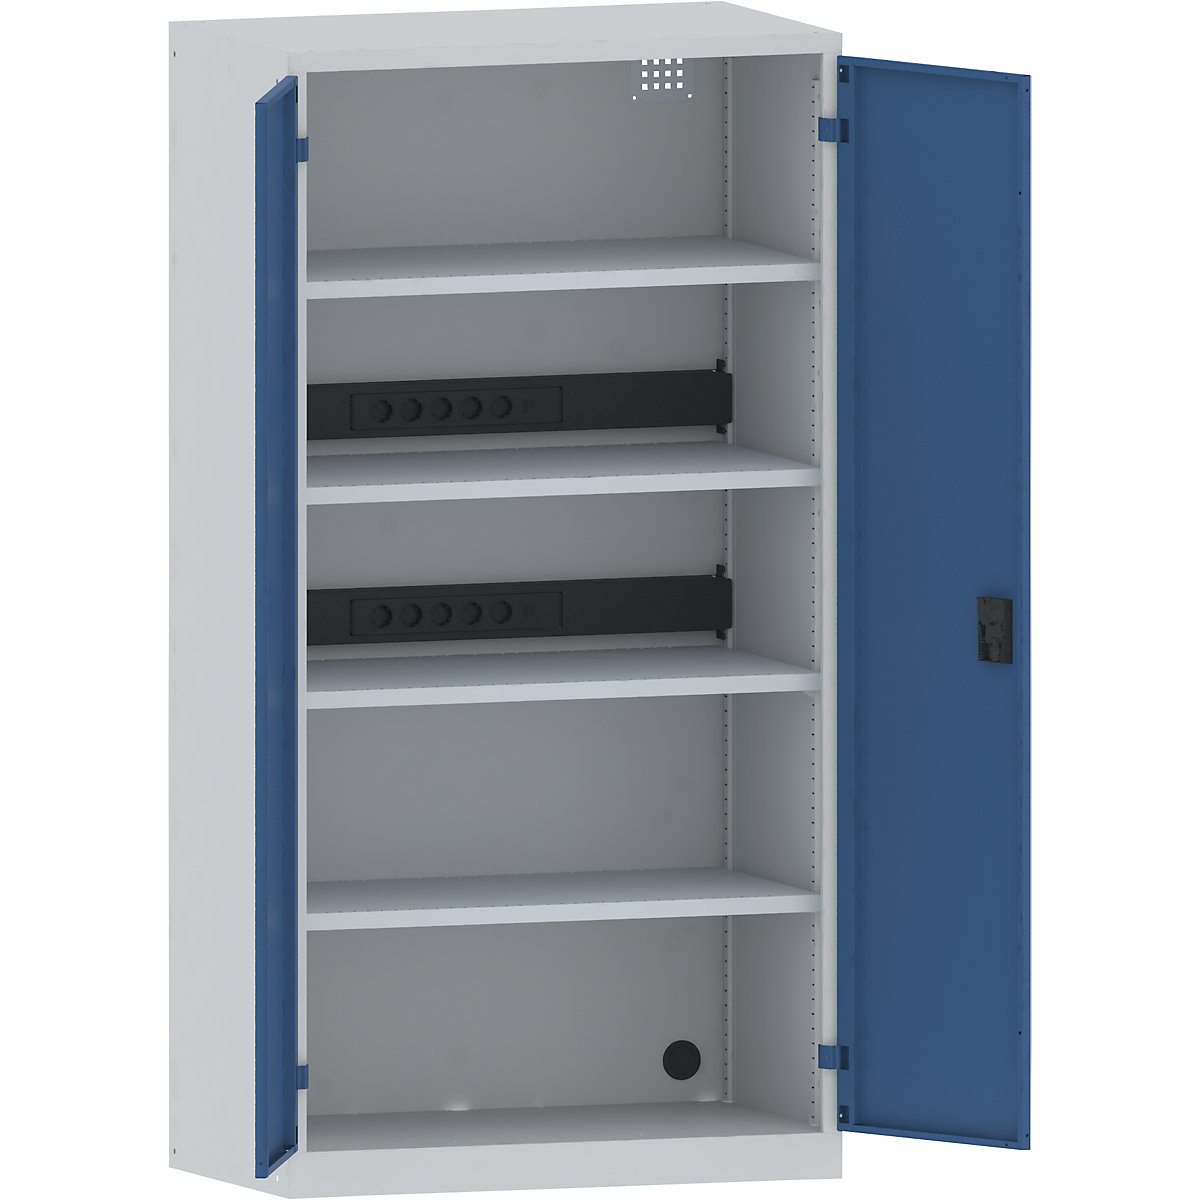 Battery charging cabinet – LISTA, 4 shelves, solid panel doors, 2 power strips at rear, grey / blue-19